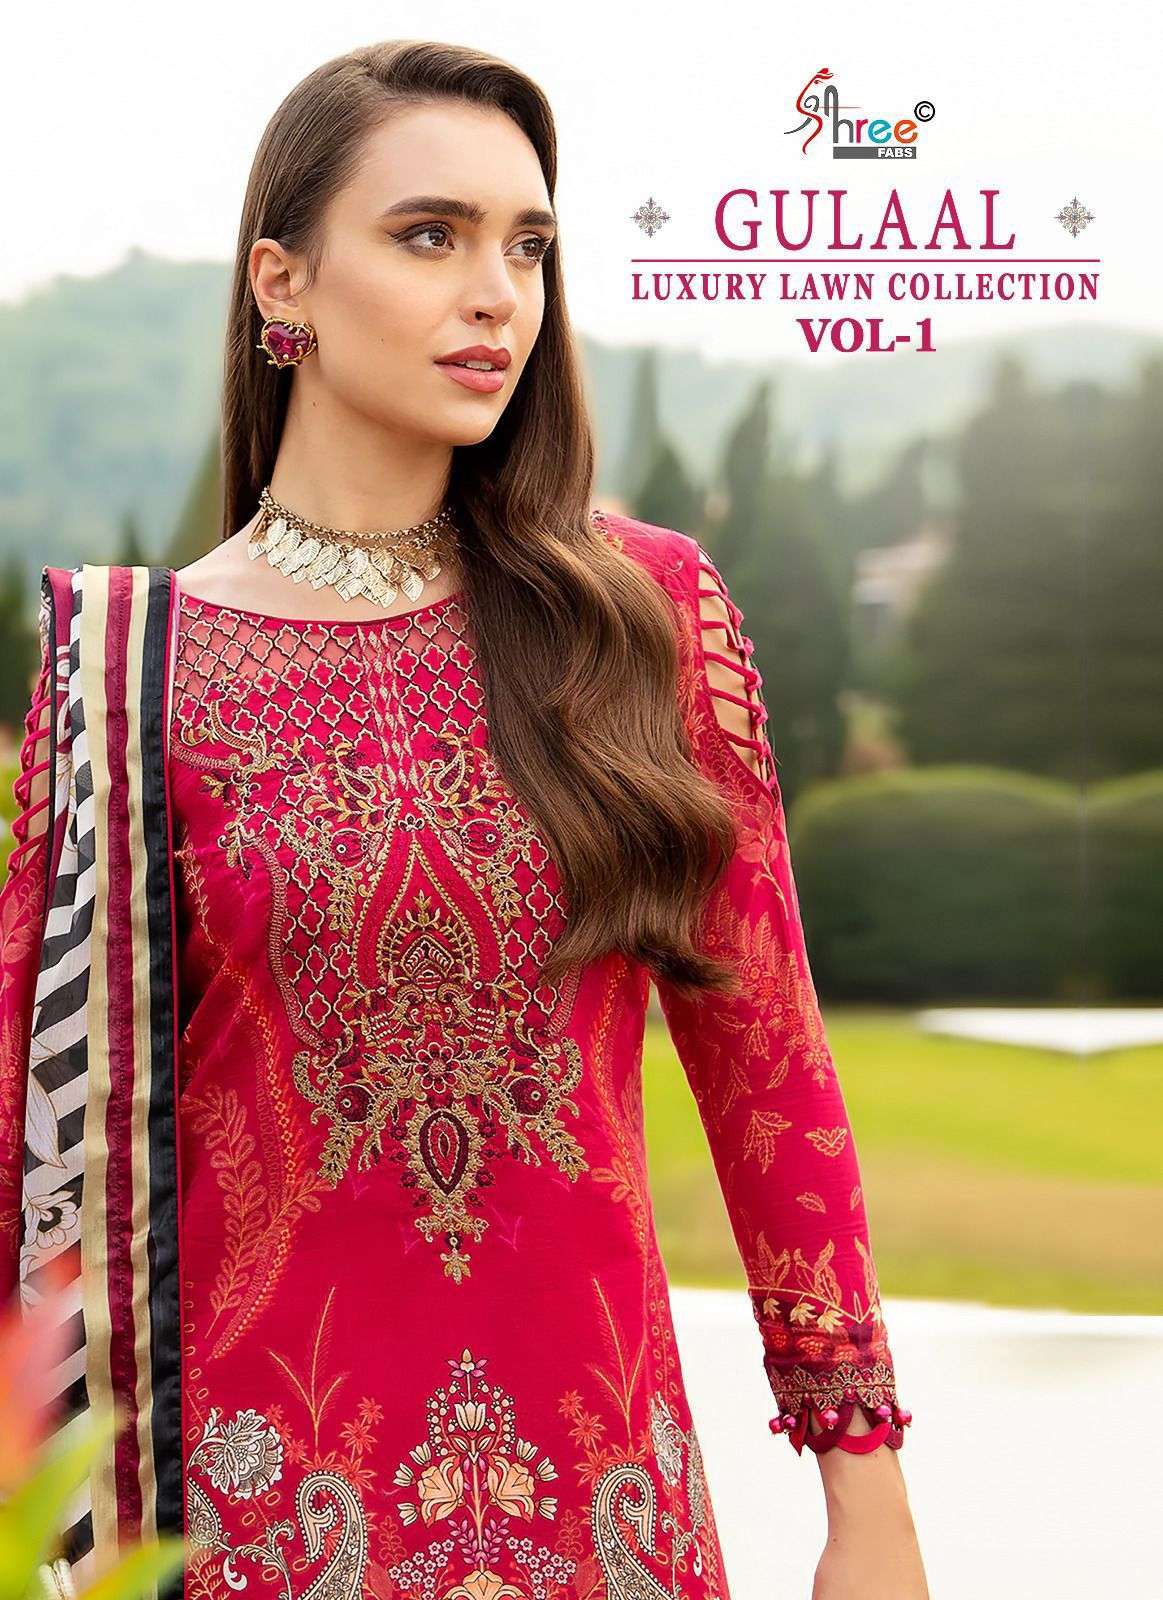 SHREE FABS GULAAL LUXURY LAWN COLLECTION VOL 1 PAKISTANI COTTON SUIT DEALERS 